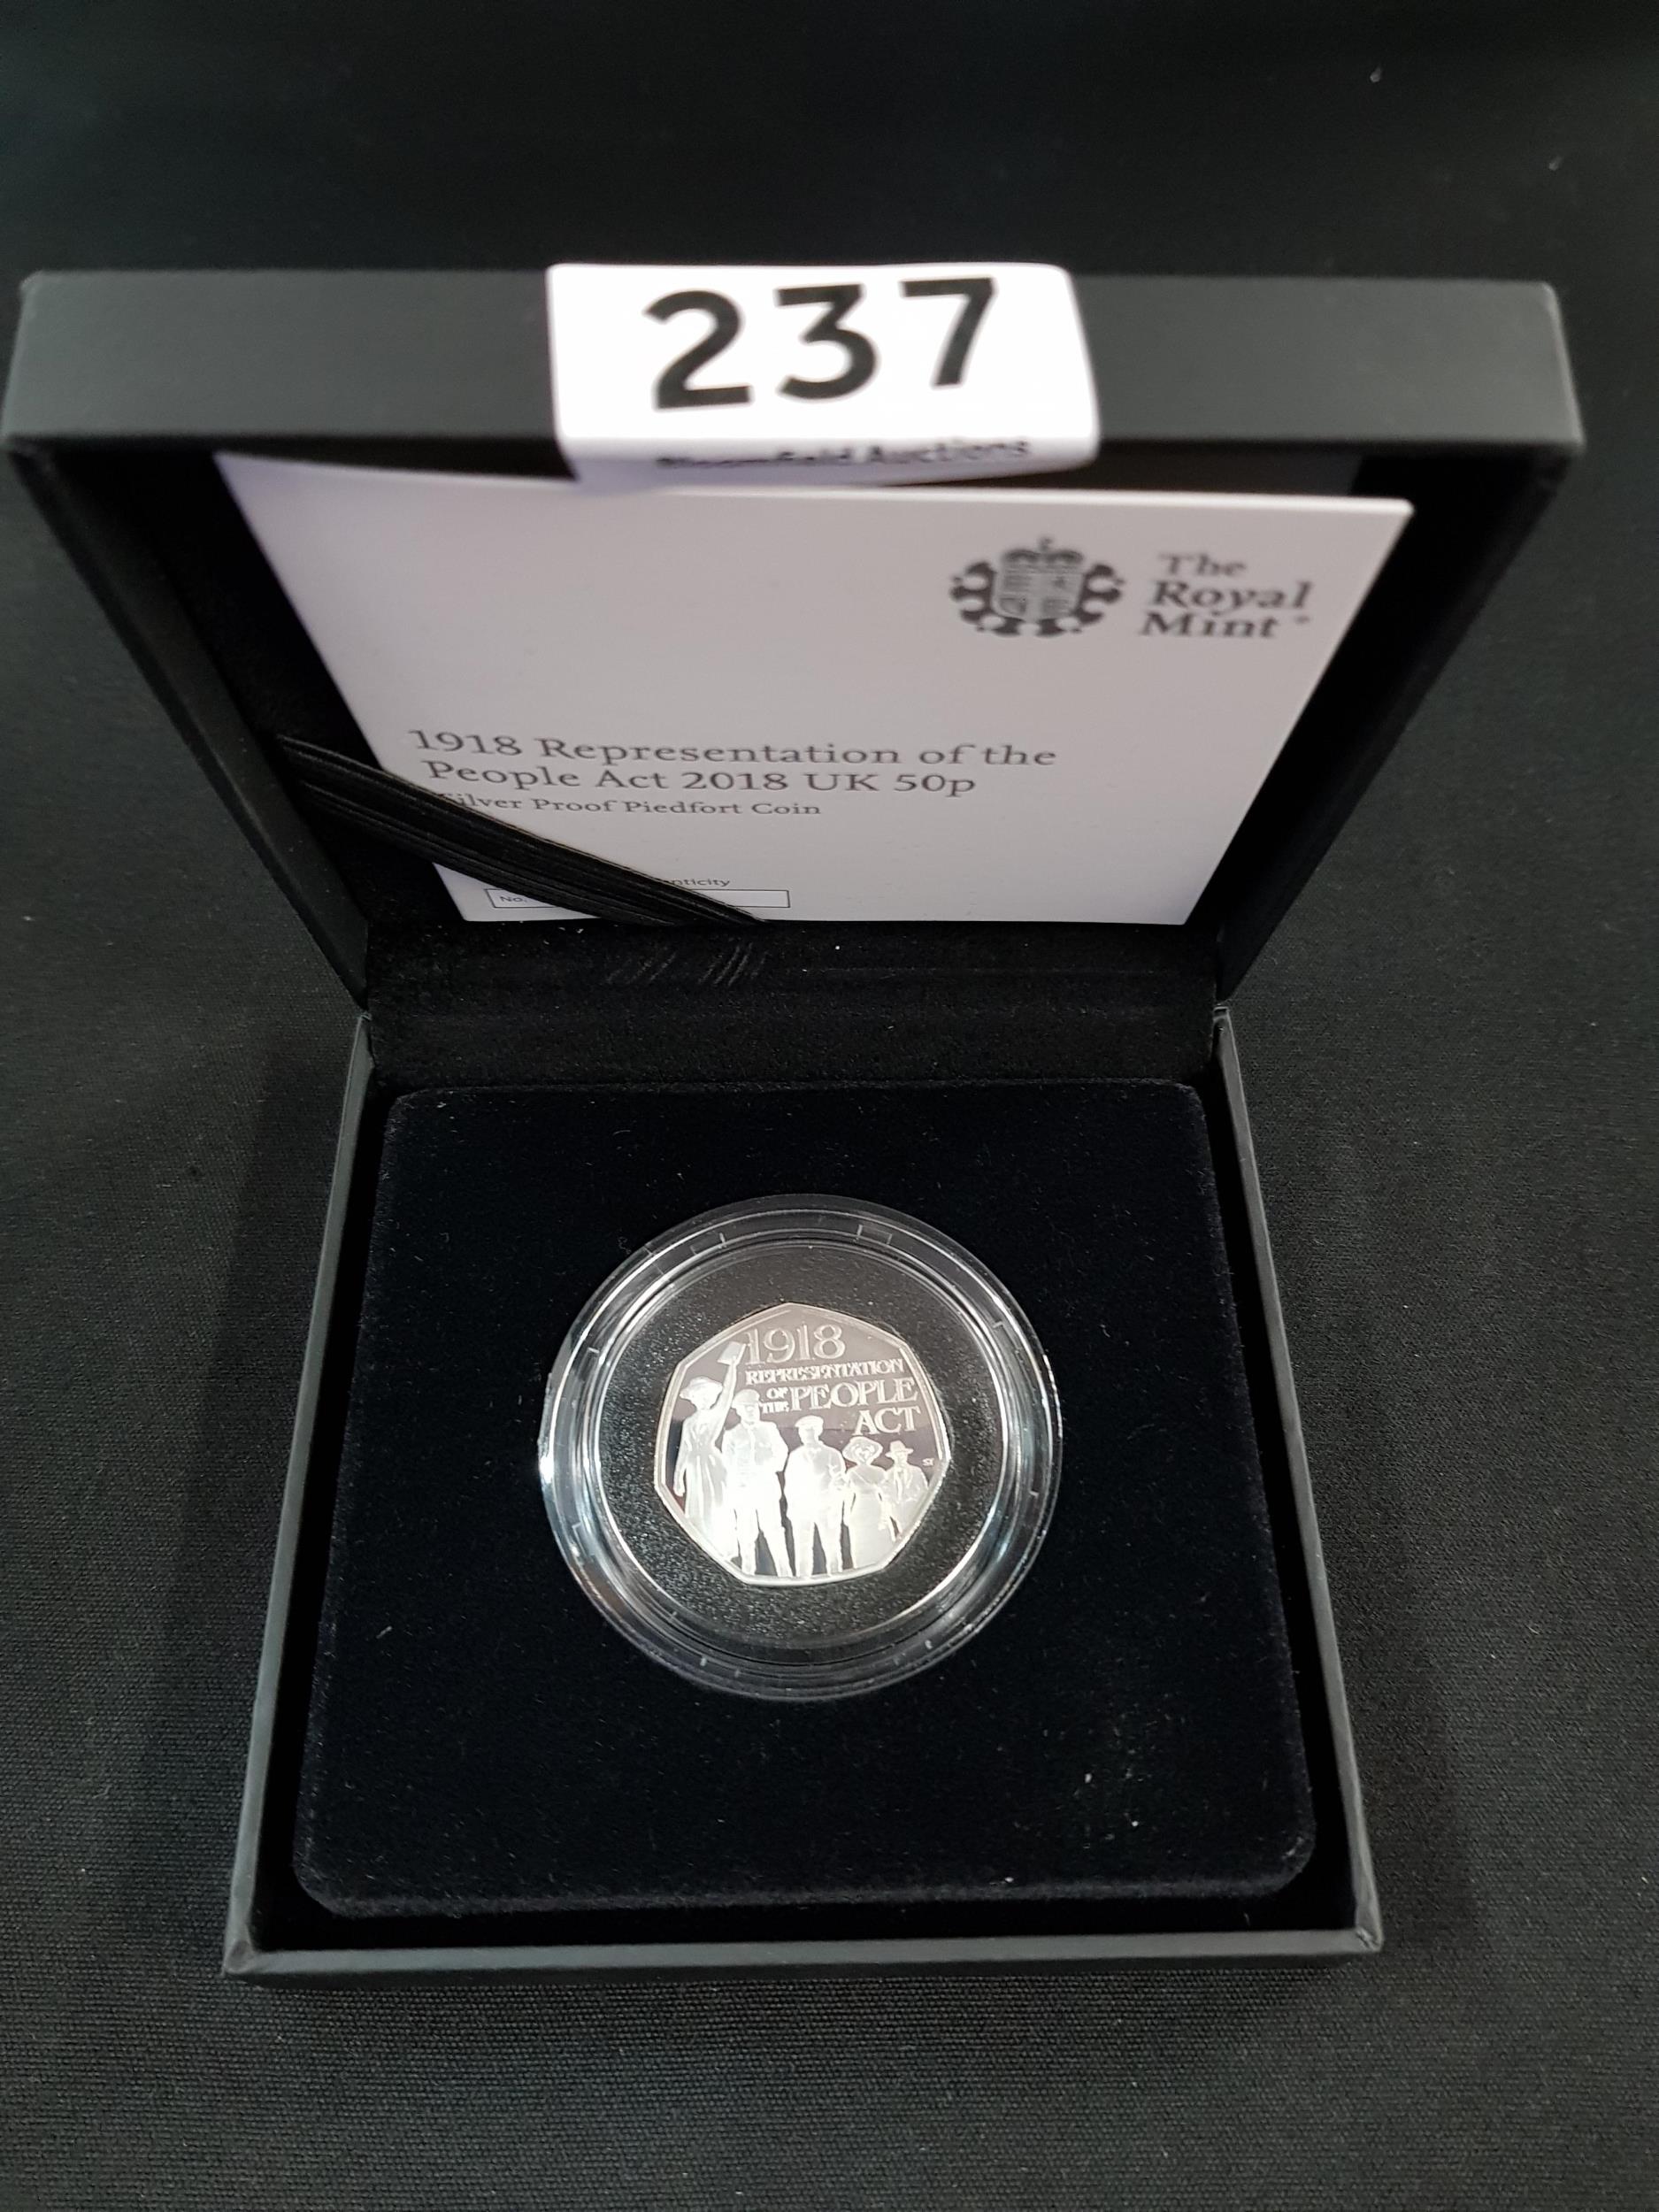 2018 SILVER PROOF PIEDFORT COIN REP OF PEOPLE ACT 1918 50P